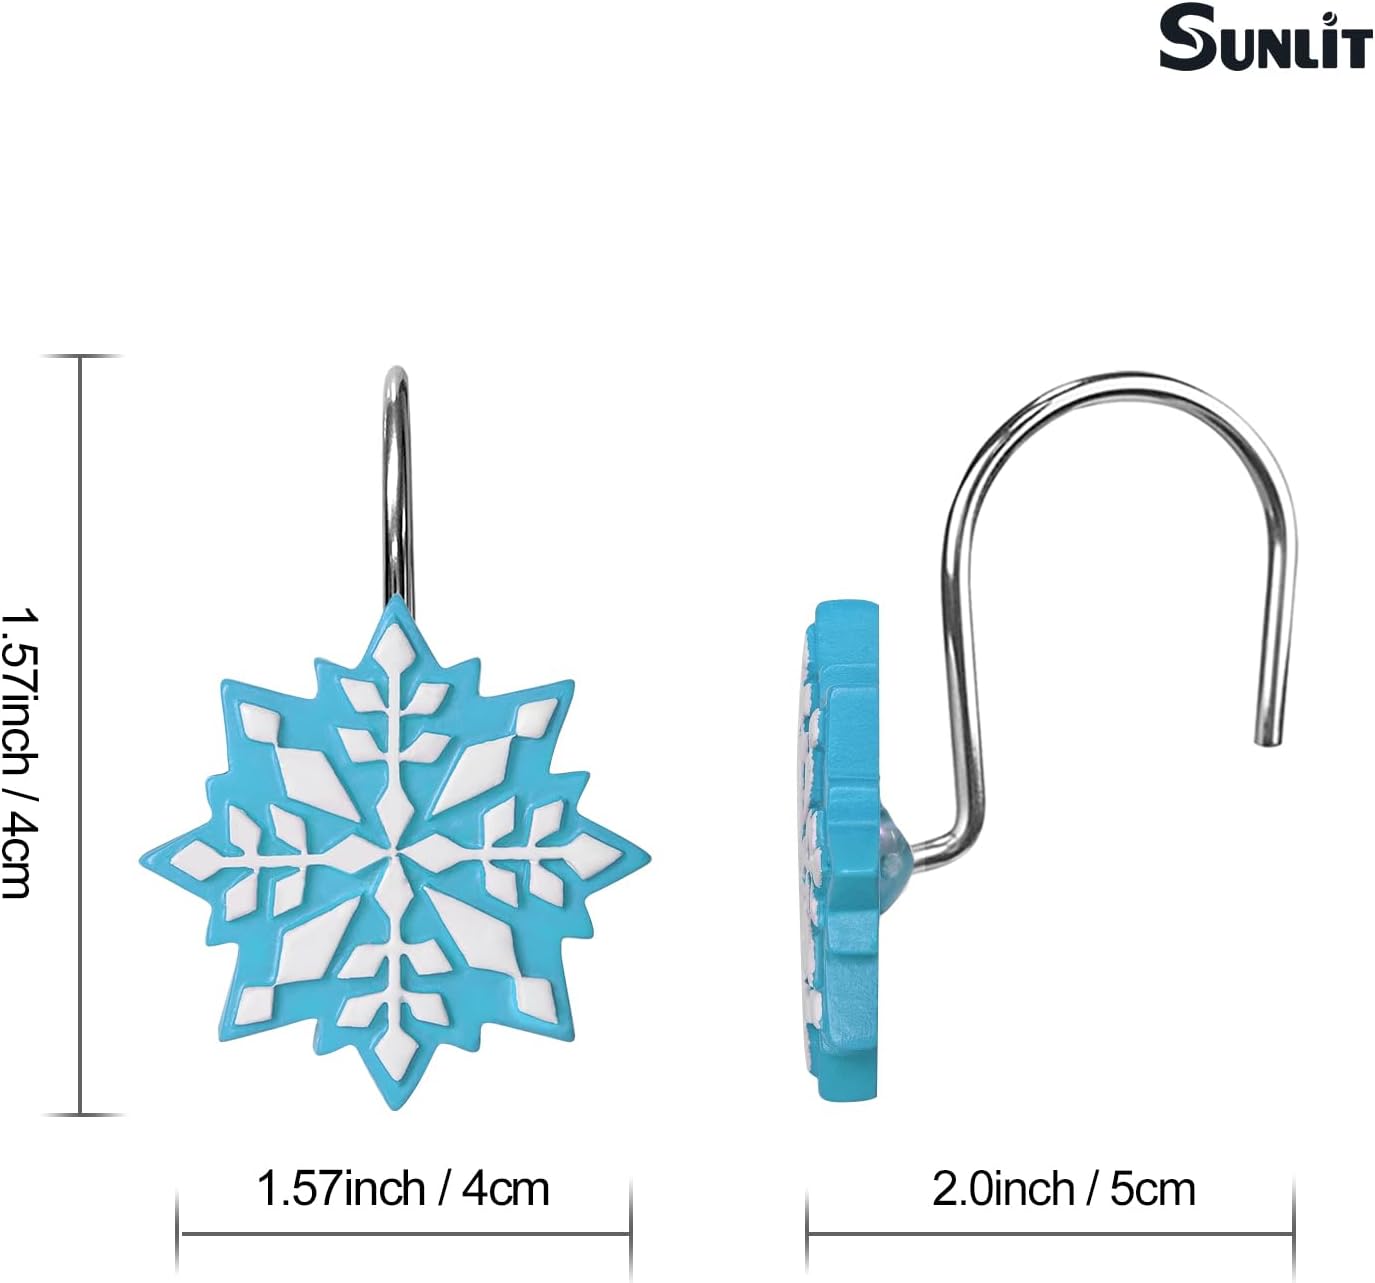 Sunlit Christmas Shower Curtain Hooks Snowflakes Shower Curtain Rings, Resin, Blue and White Christmas Decor, Winter Bathroom Decoration - 12 Pack